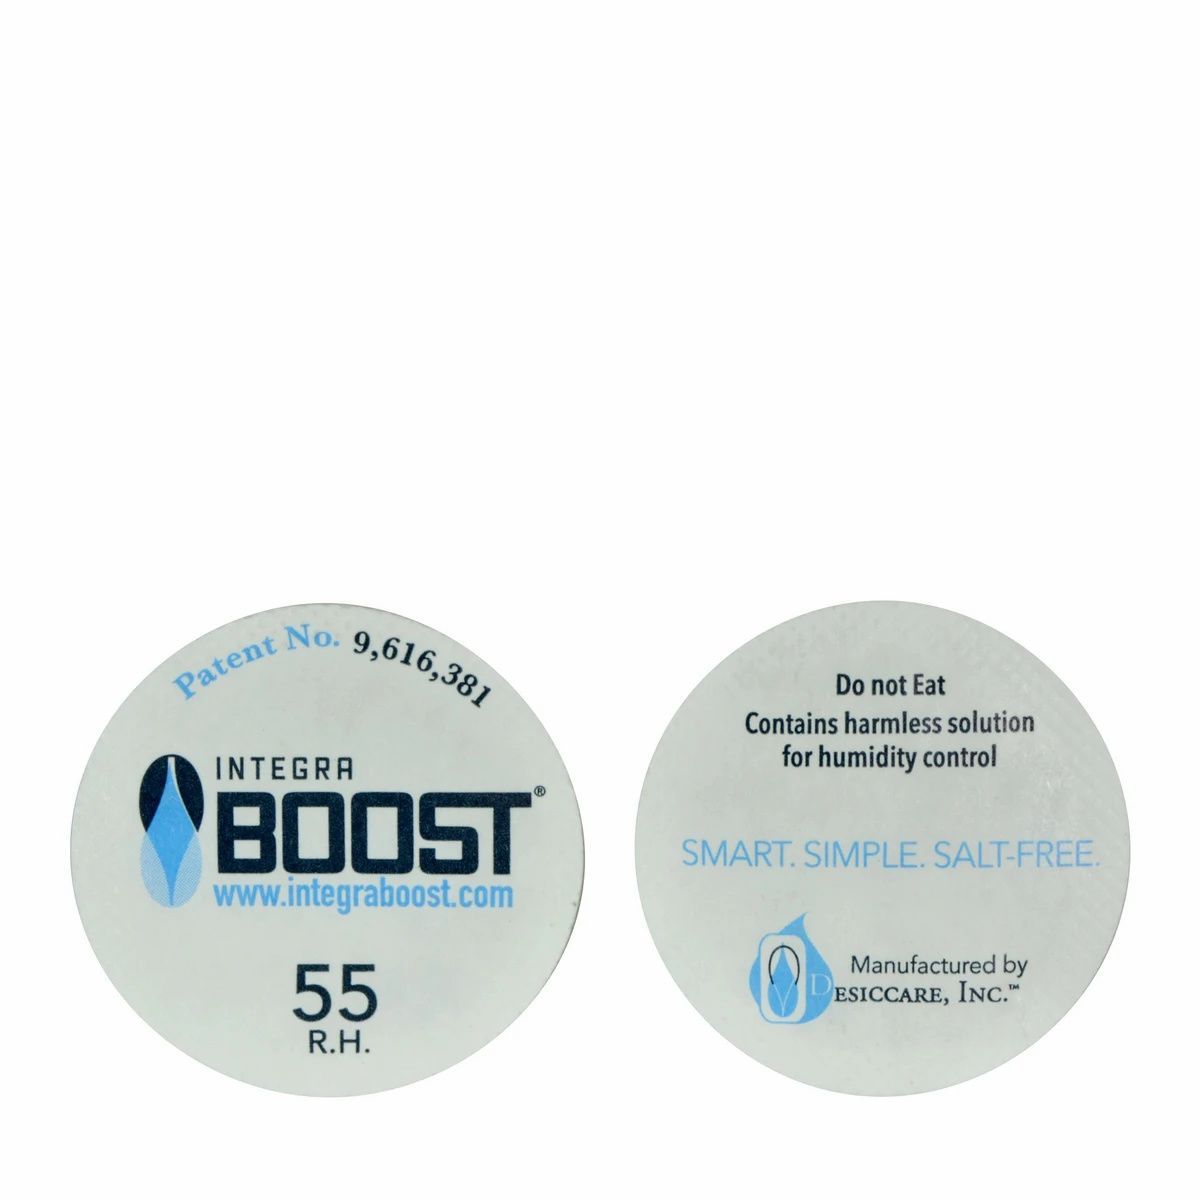 Desiccare Integra BOOST® 2-way humidity control circle packs